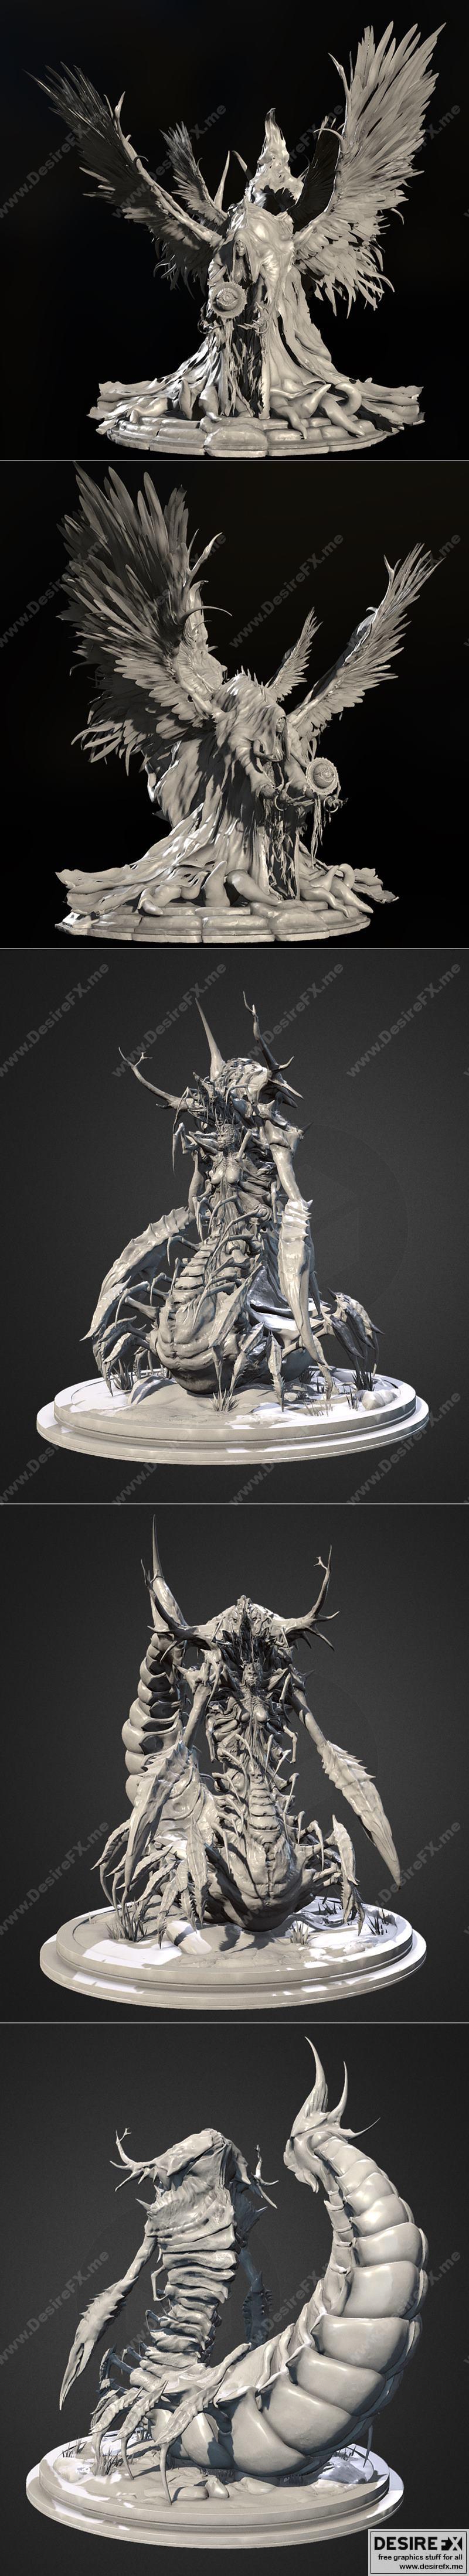 Desire FX 3d models | Deaths oracle and The curse of Serqet – 3D Print ...